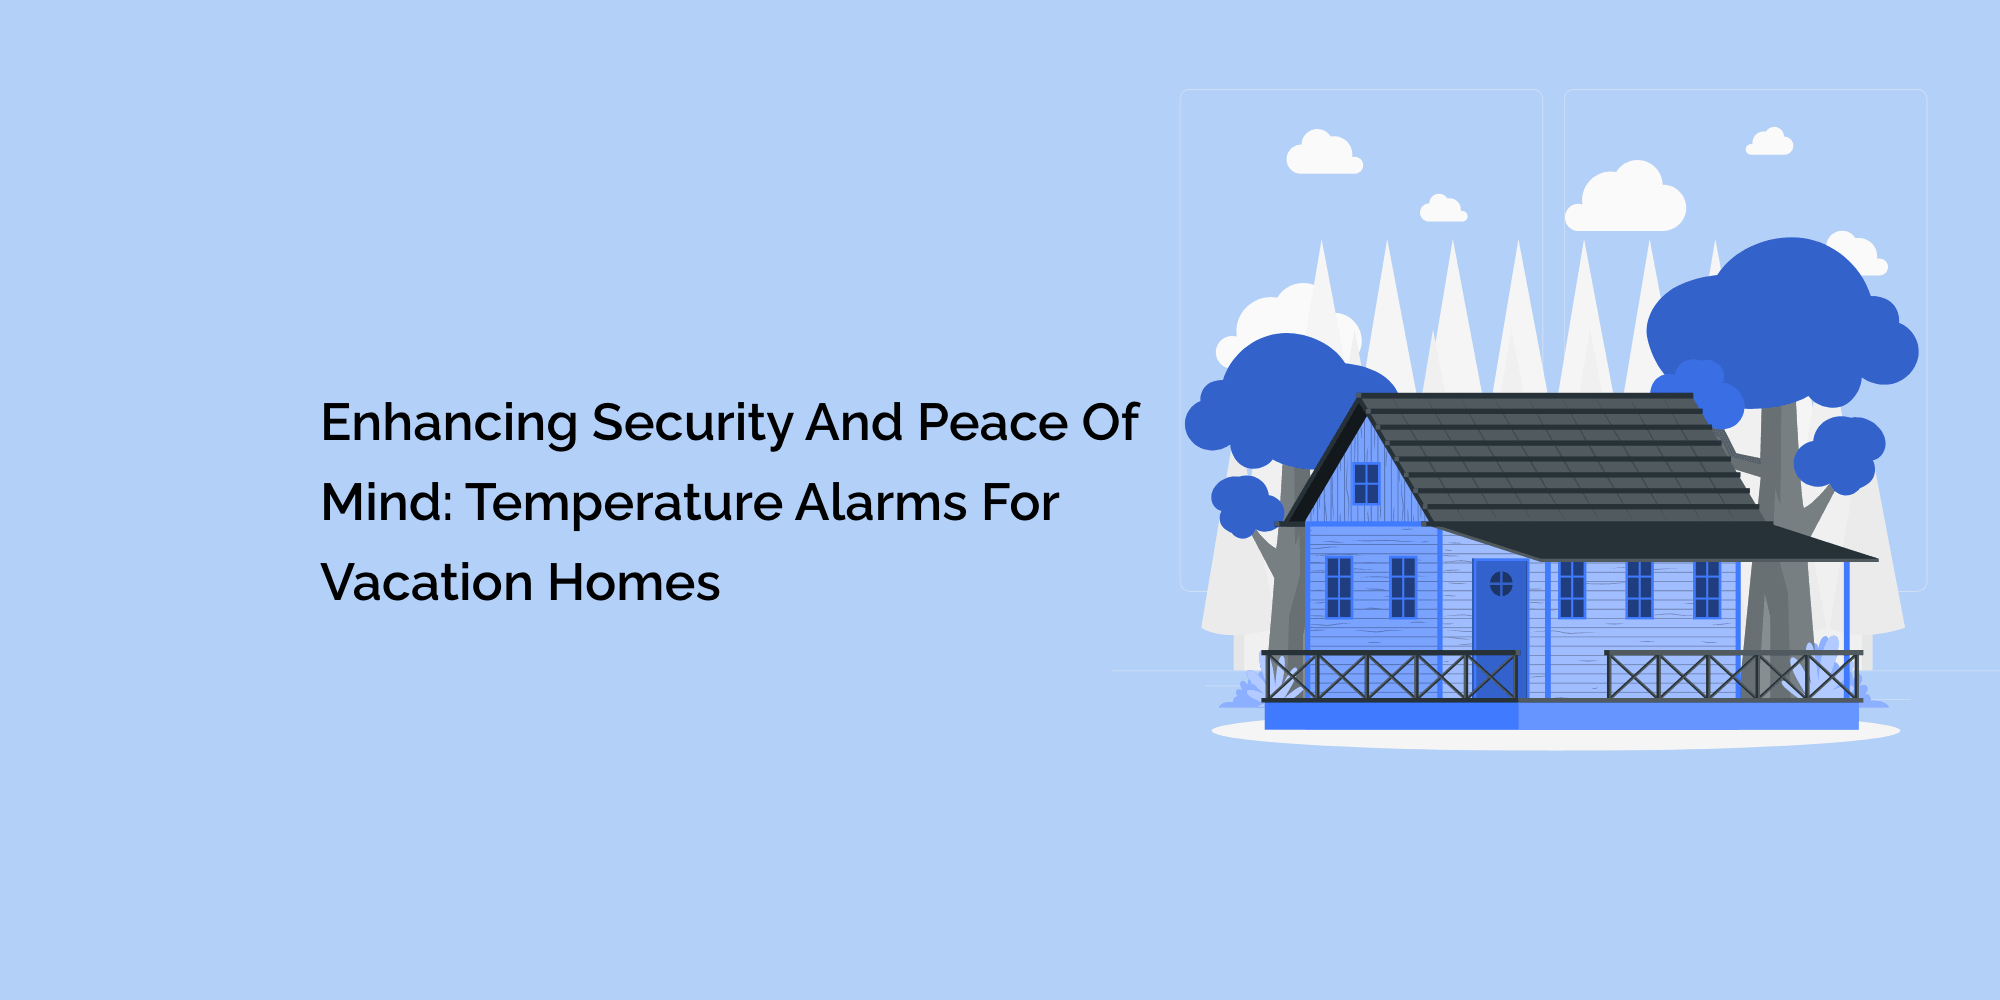 Enhancing Security and Peace of Mind: Temperature Alarms for Vacation Homes